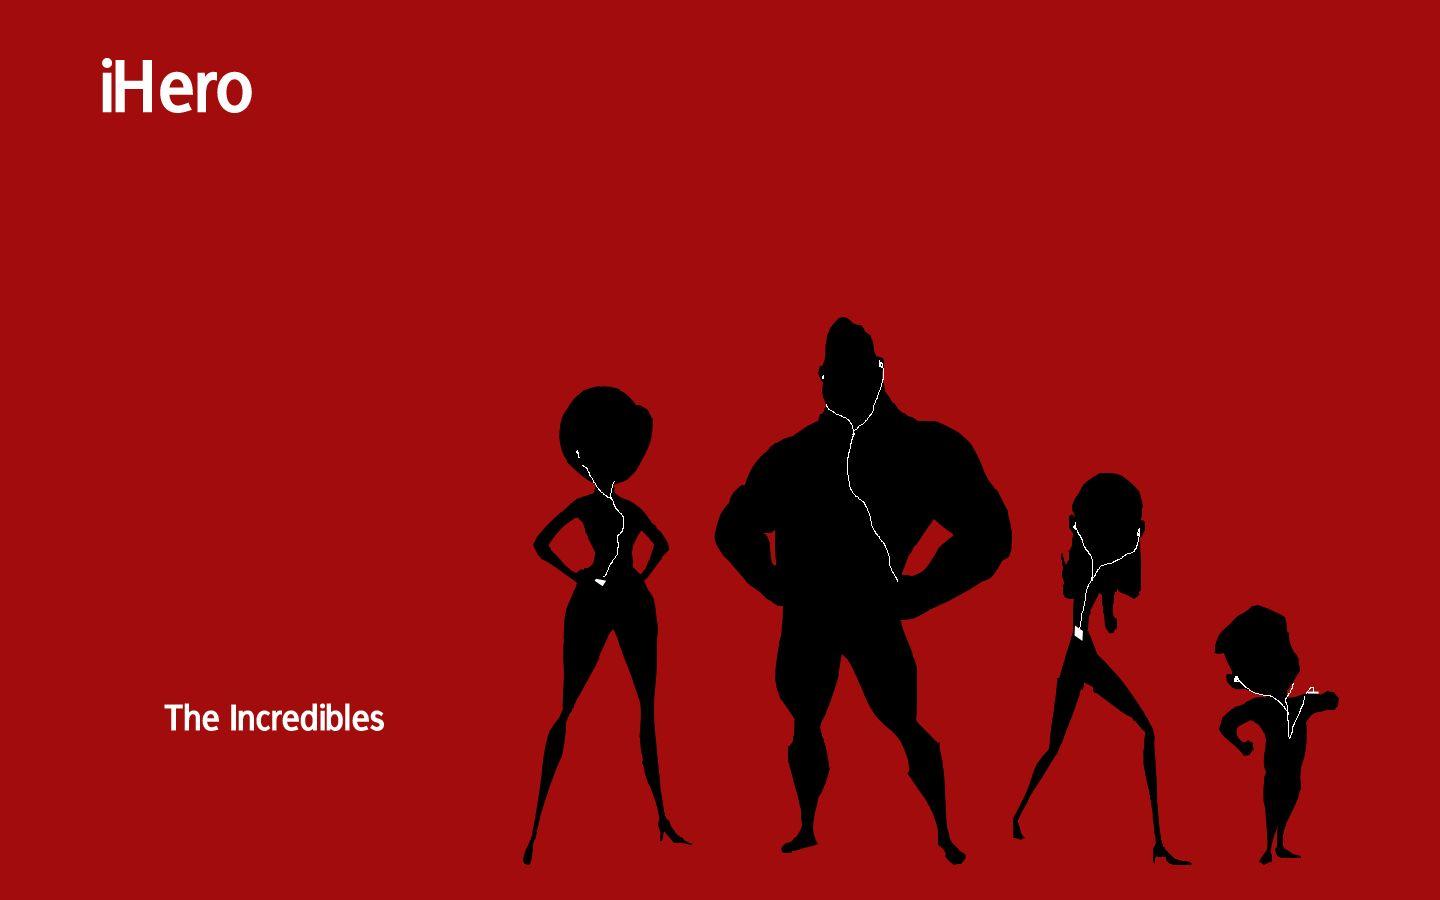 Computer wallpaper for free, the Incredibles iPod style background